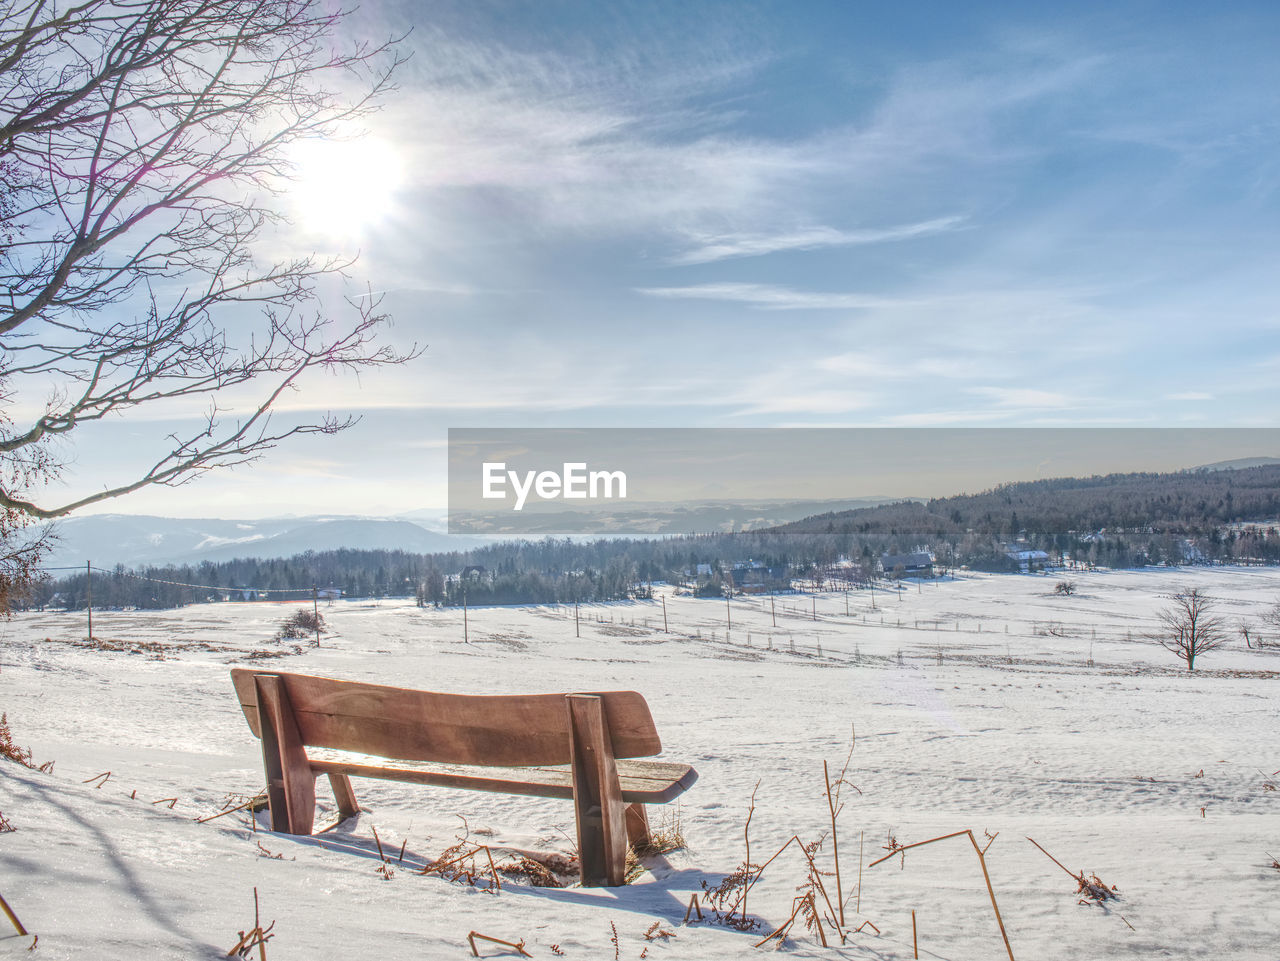 Winter landscape, sunny day. footprints in the fresh snow lead to a wooden bench